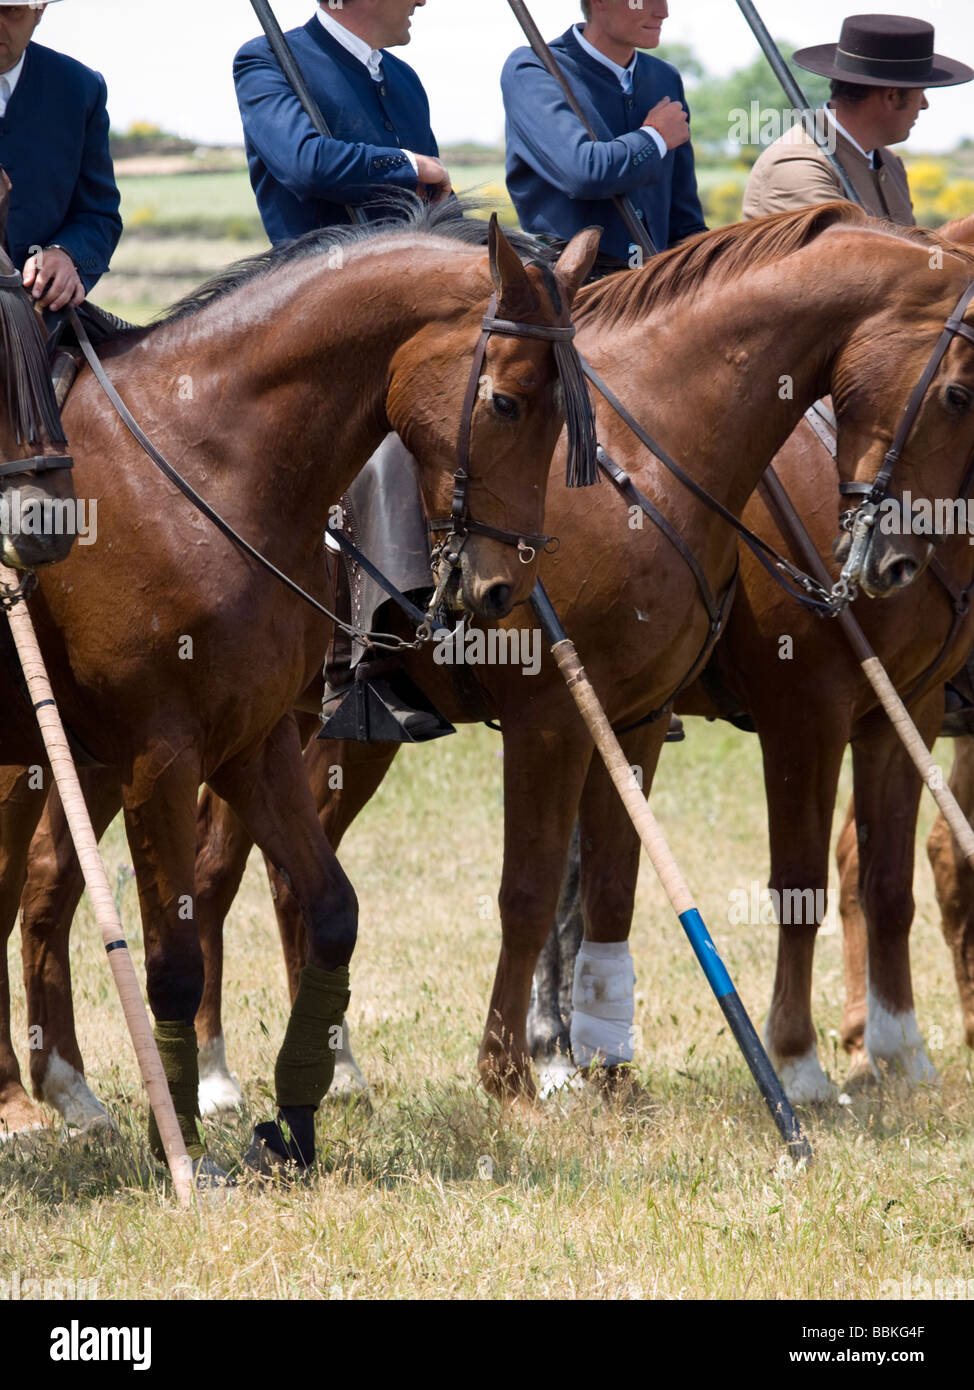 Spanish Horses at an 'Acoso y derribo' event Stock Photo